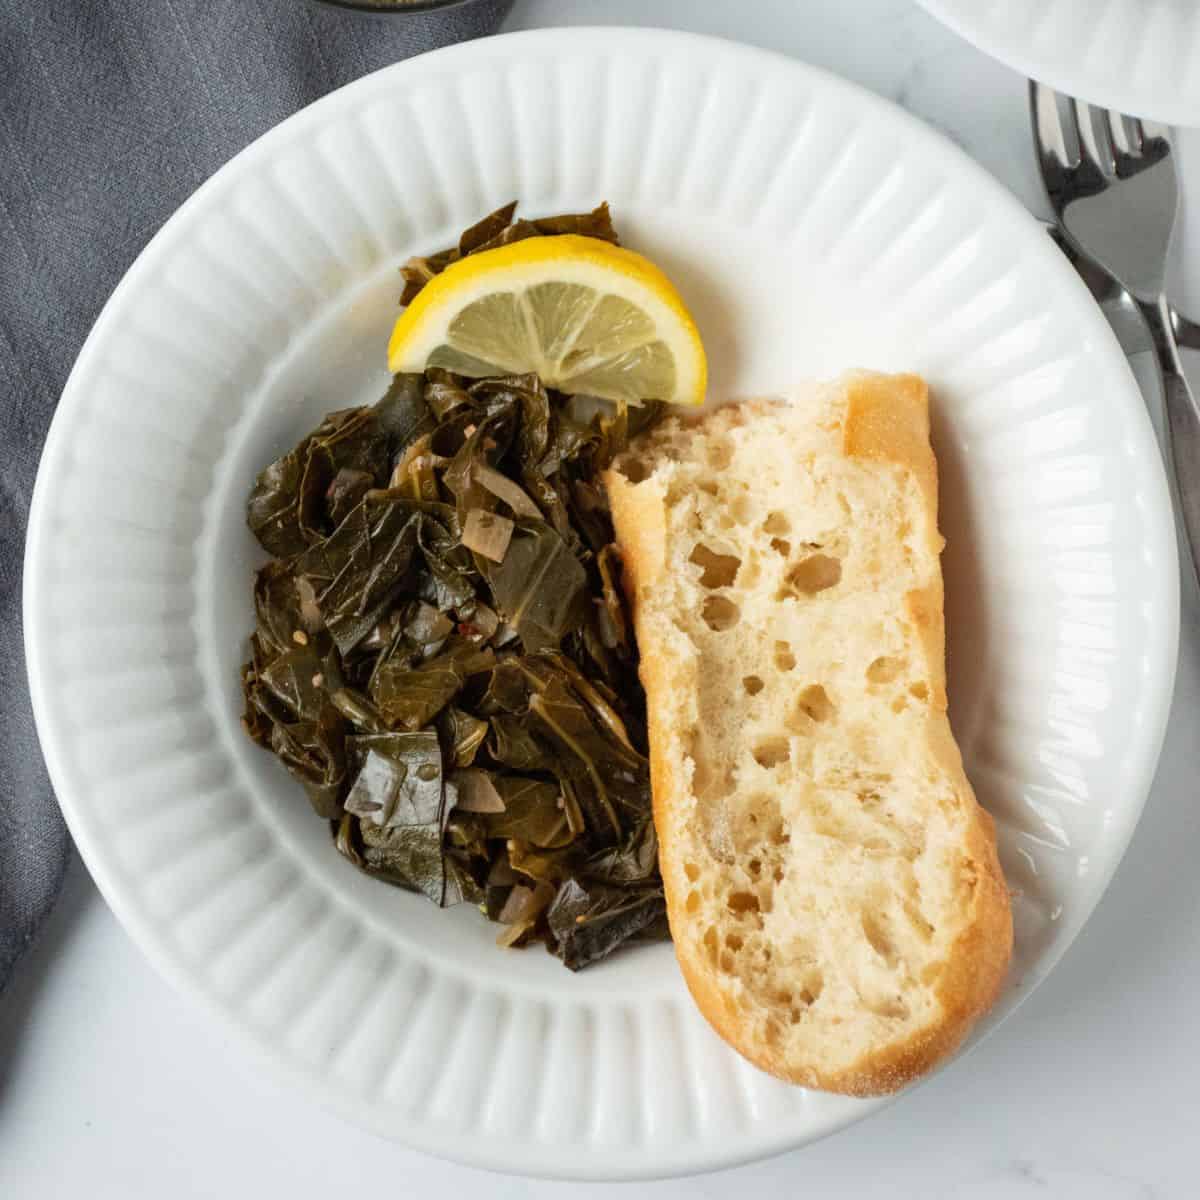 Bowl with collard greens and crusty bread, garnished with a lemon slice.